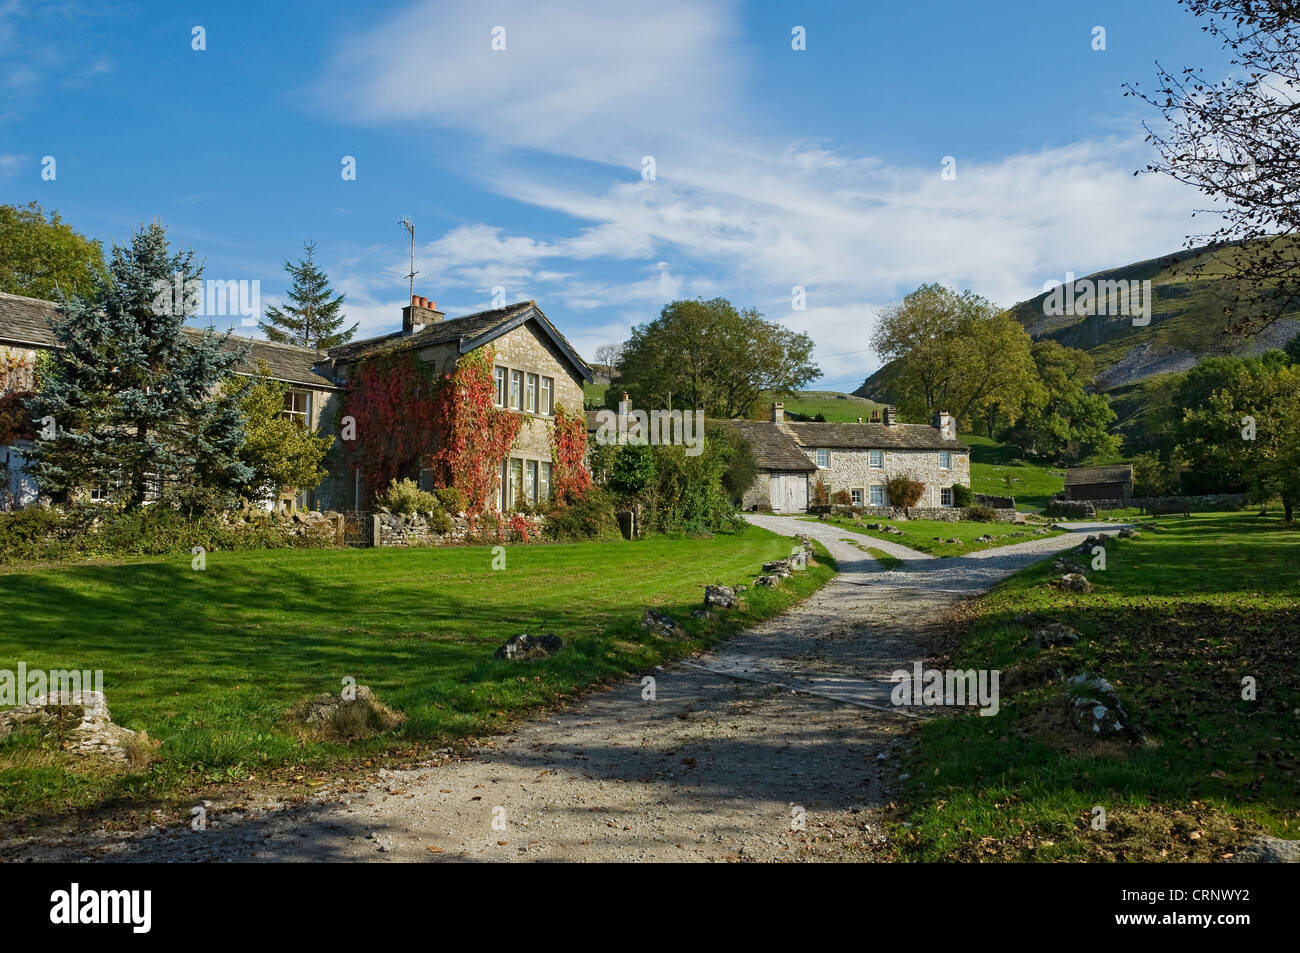 Cottages in the small village of Conistone in Upper Wharfedale. Stock Photo